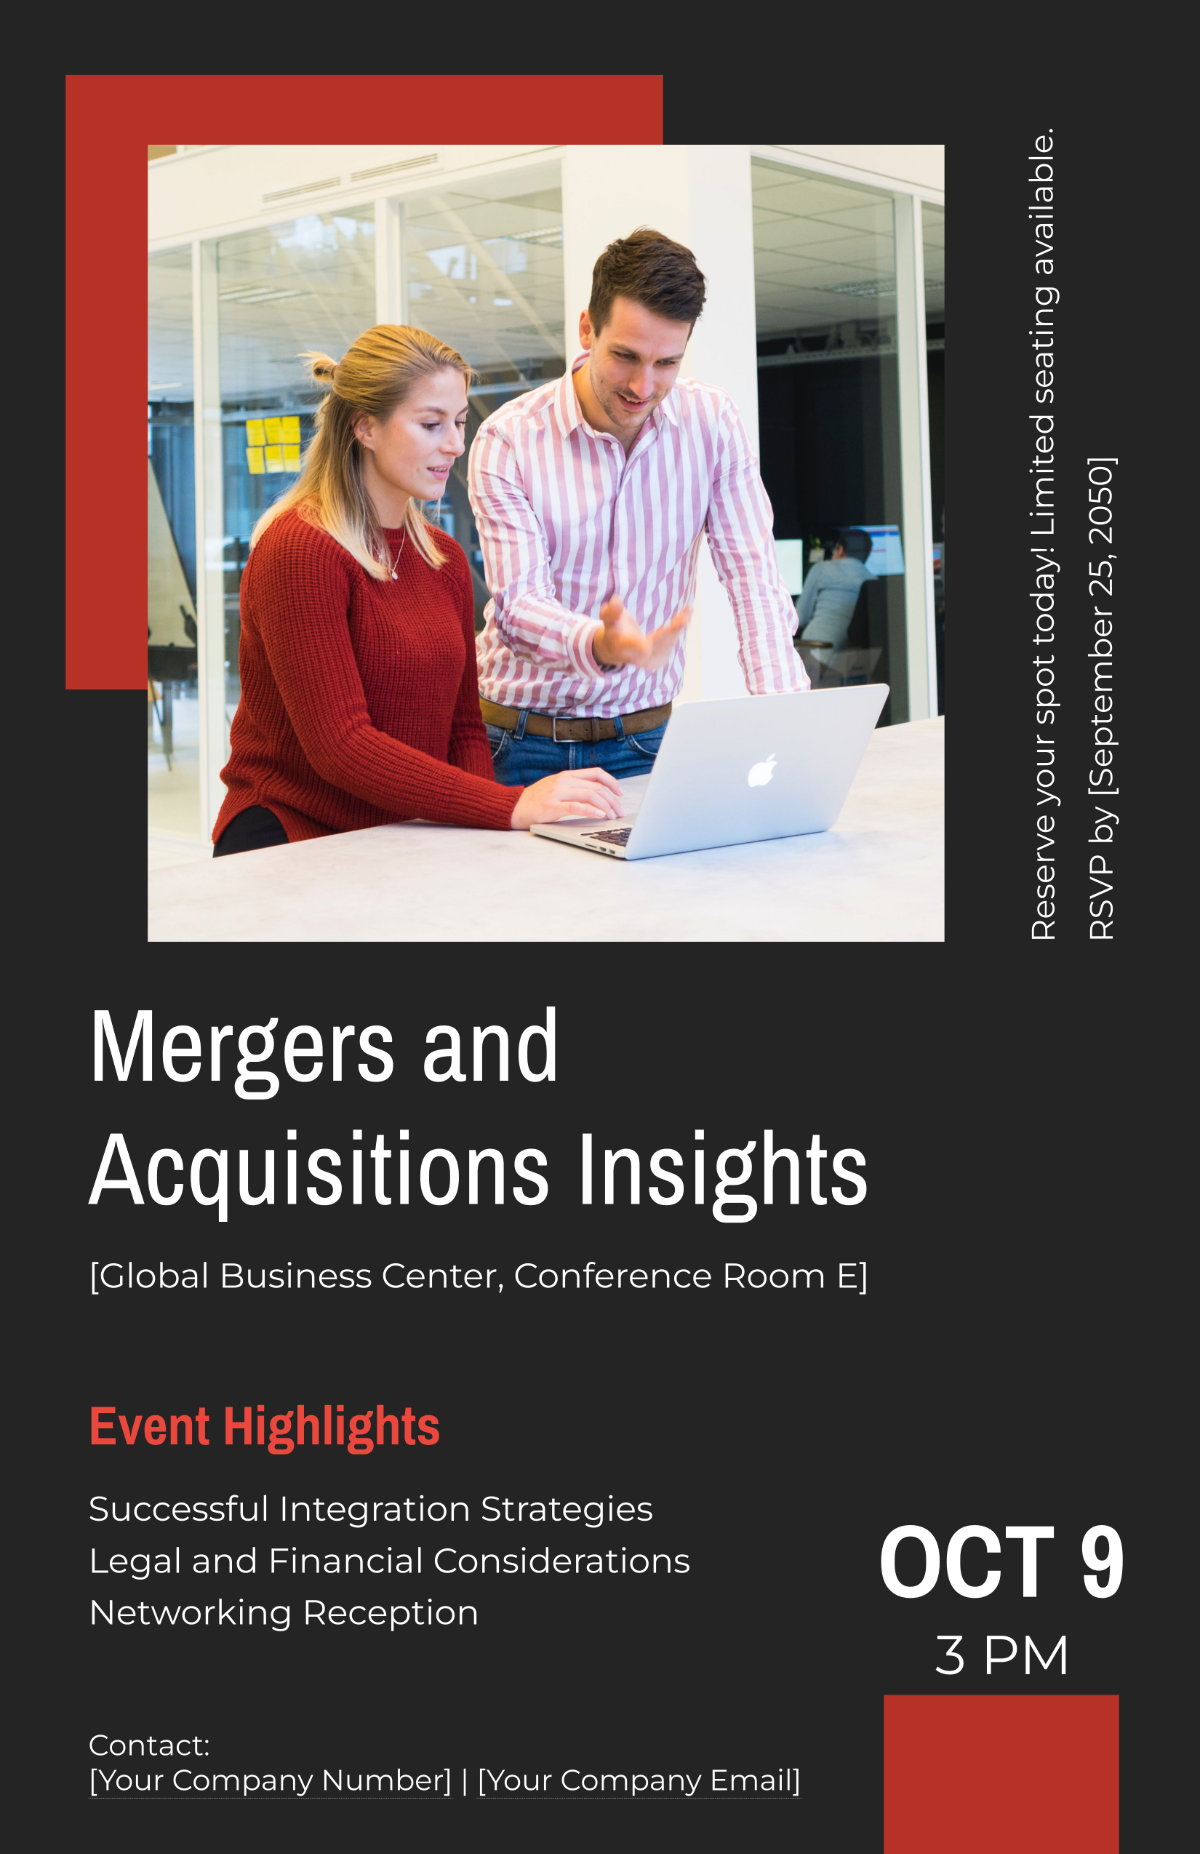 Mergers and Acquisitions Insights Poster